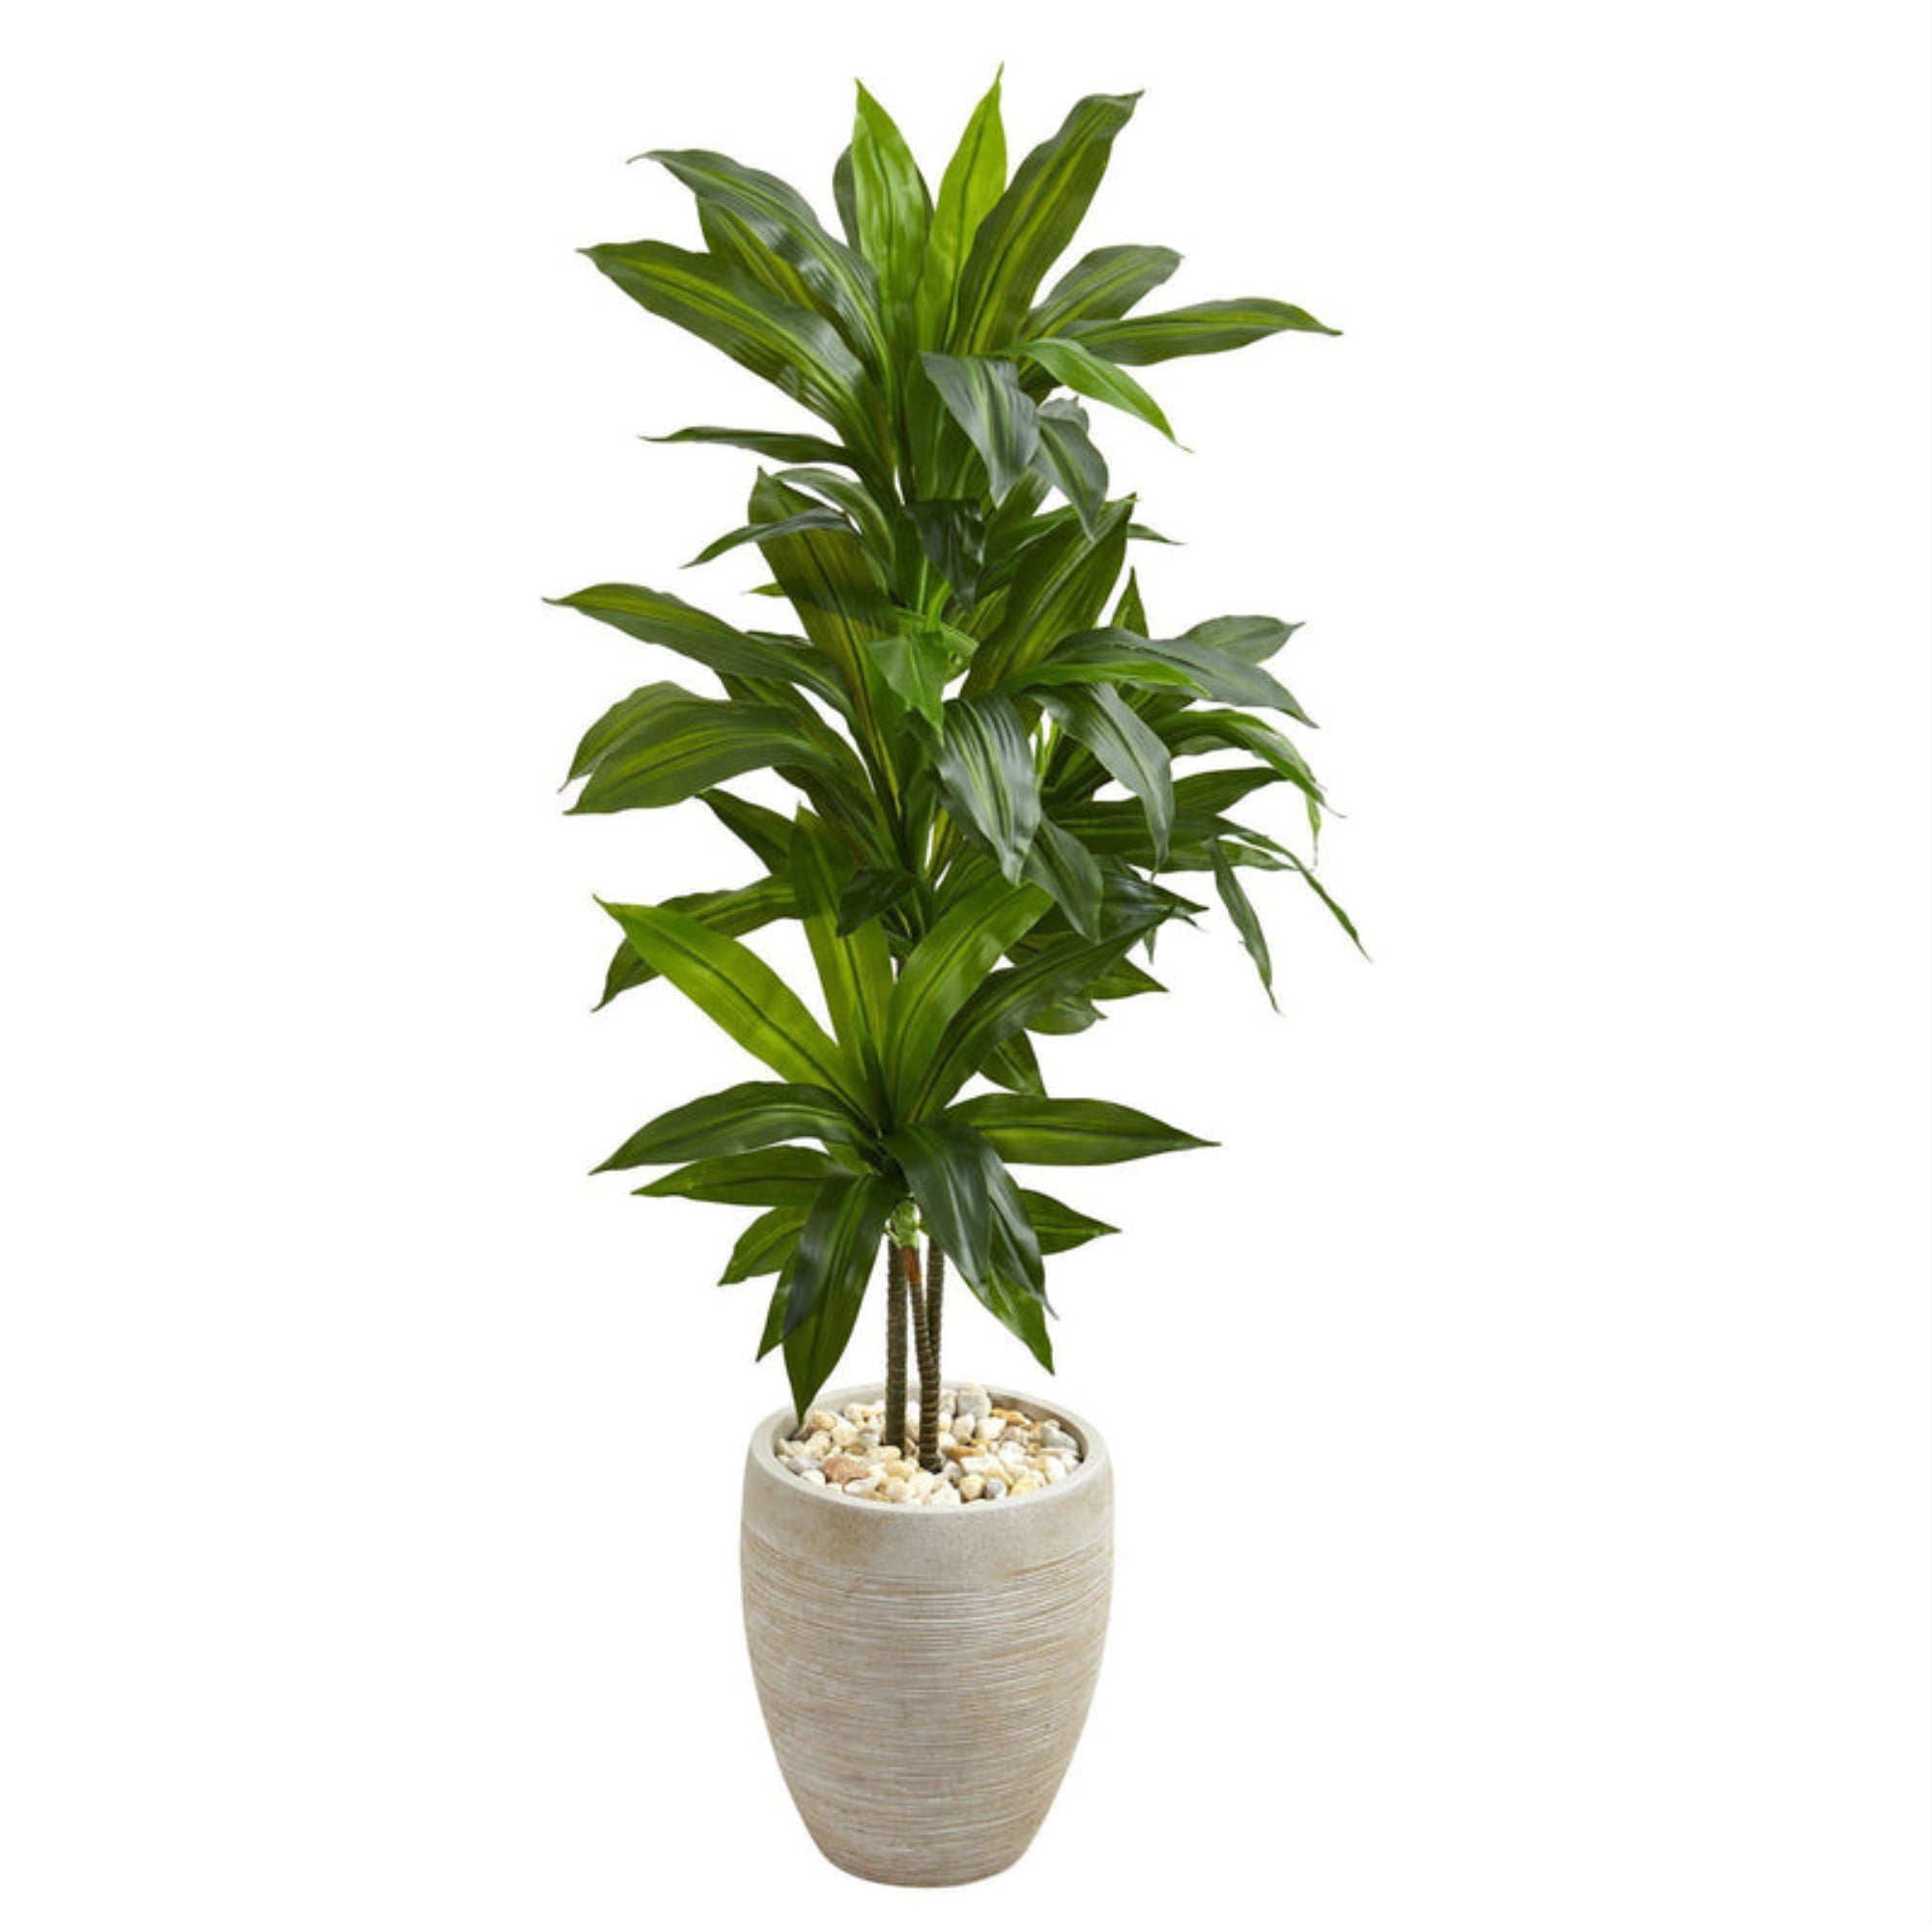 48 in H Green Dracaena Artificial Plant Realistic Look Home Office Decor Pot 